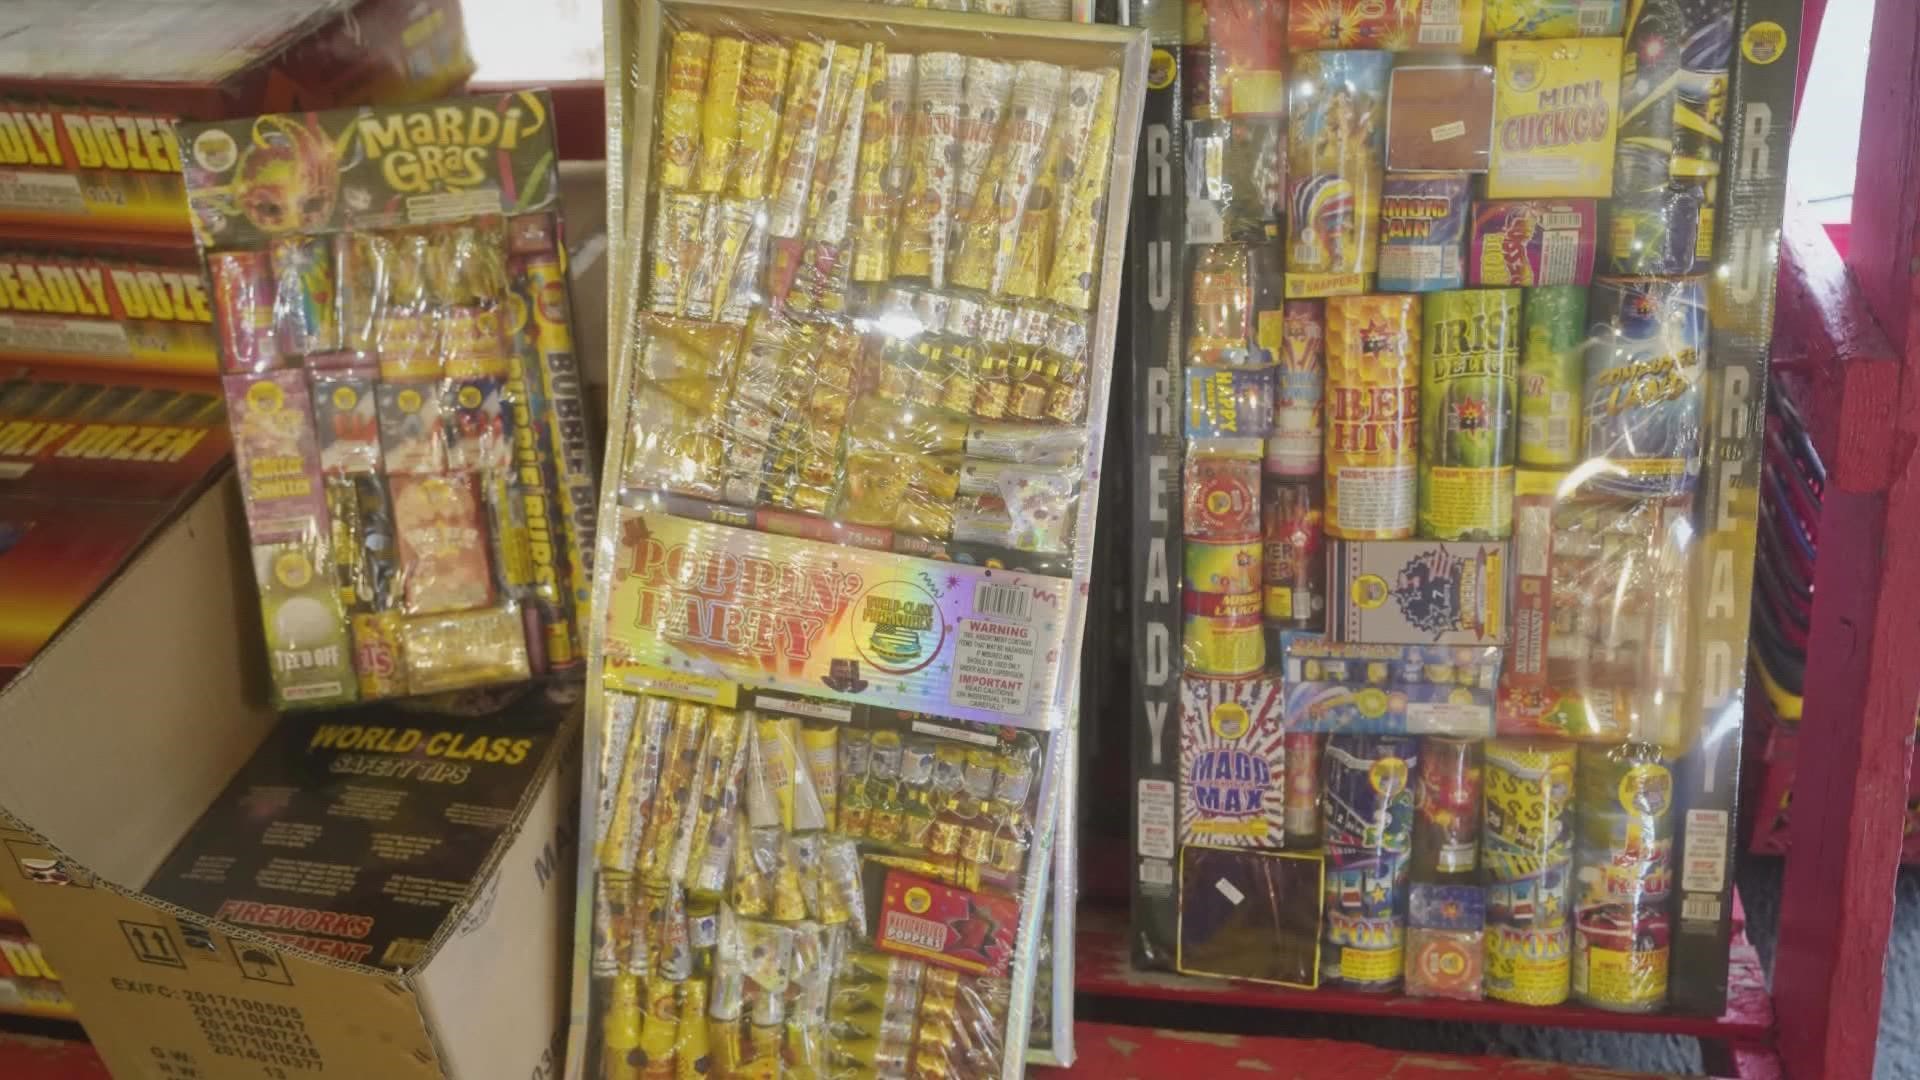 South Sound 911 launched an online reporting system for fireworks complaints.